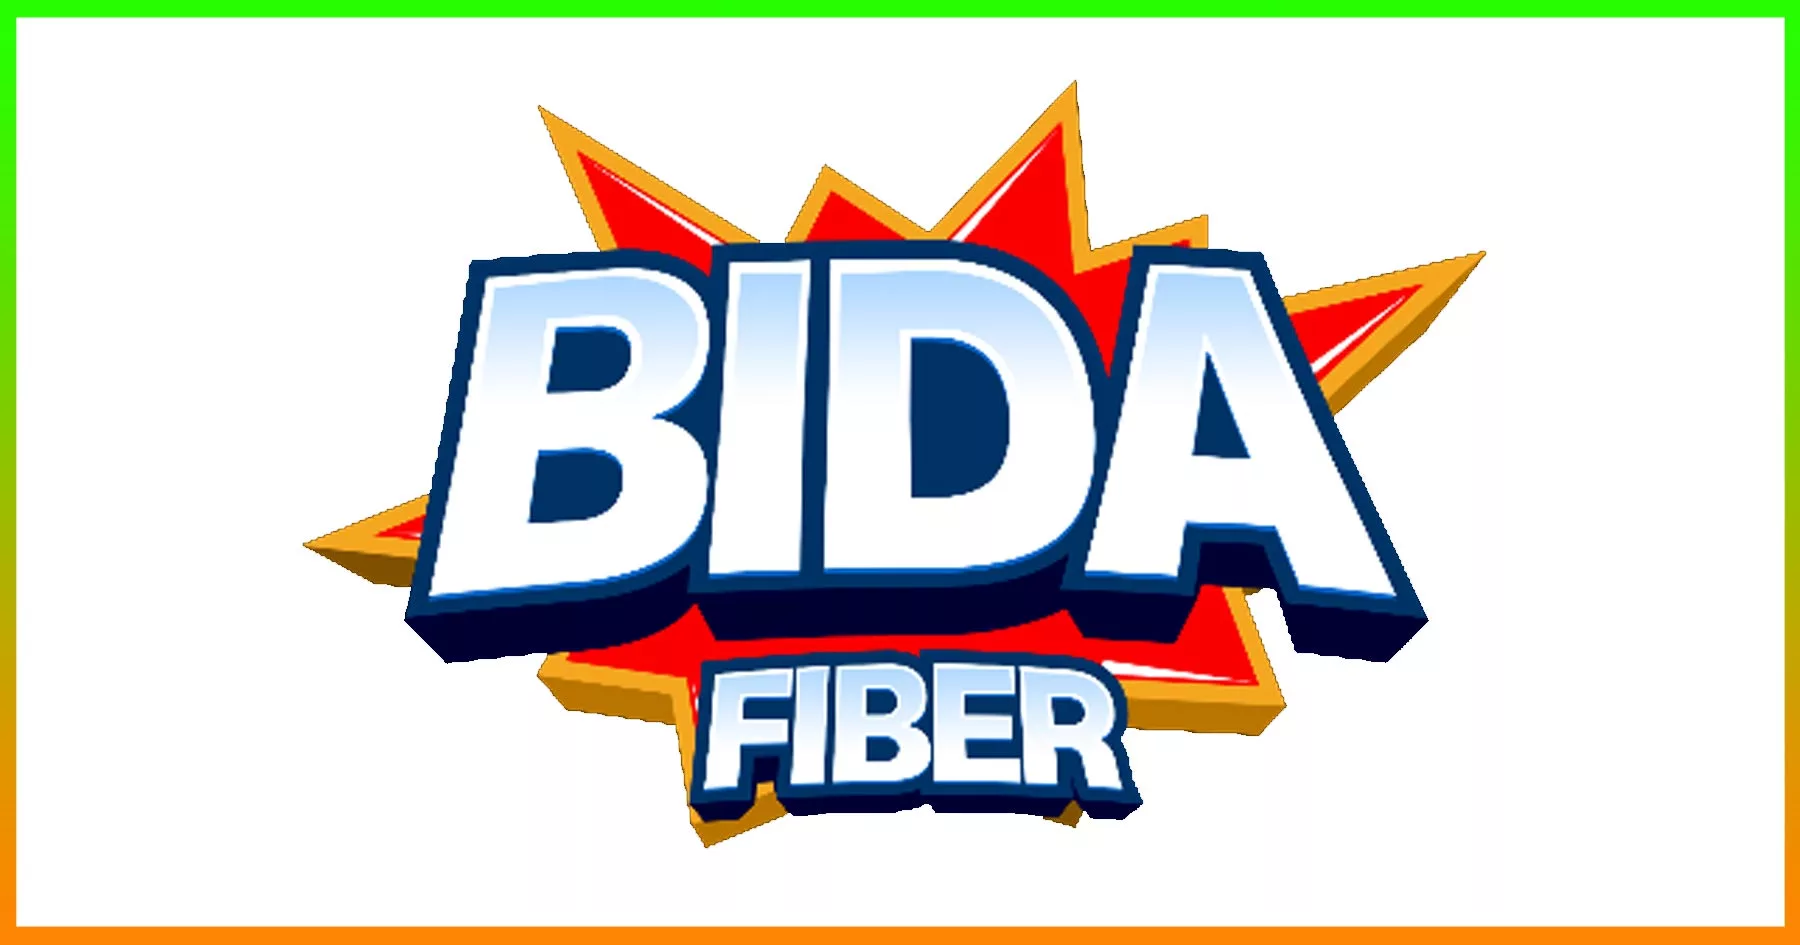 BIDA Fiber offers top-tier connectivity for employees working from home